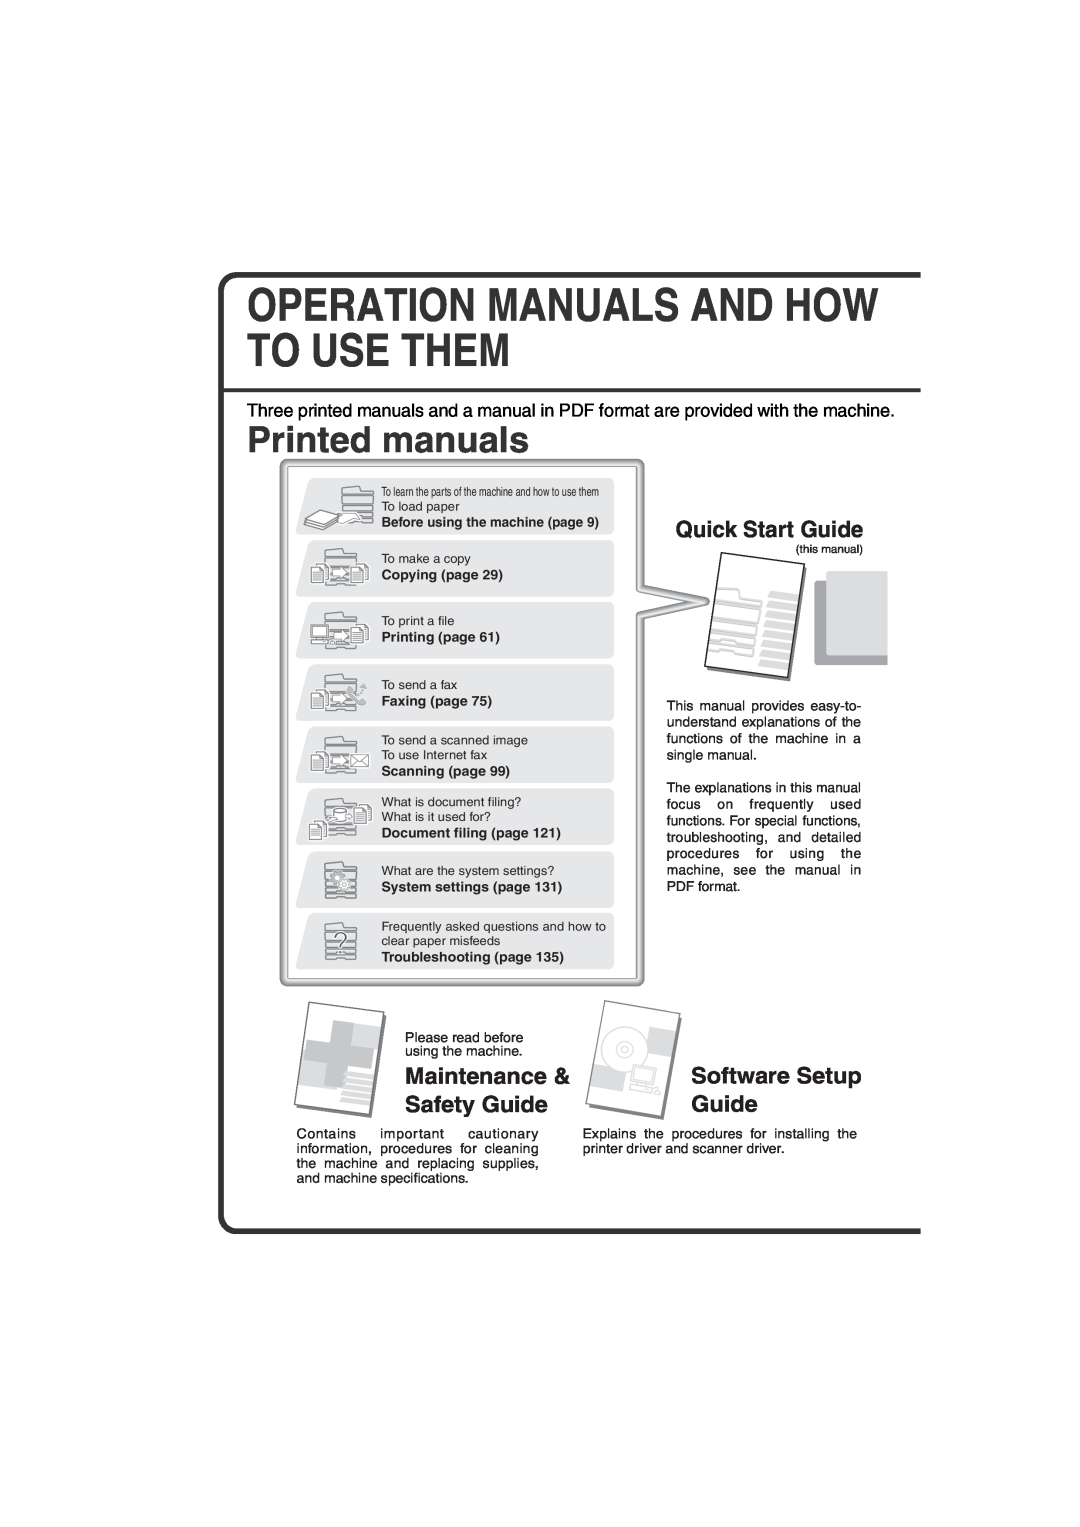 Sharp MX-C311, MX-C381 quick start Printed manuals, Maintenance Safety Guide, Quick Start Guide, Software Setup Guide 